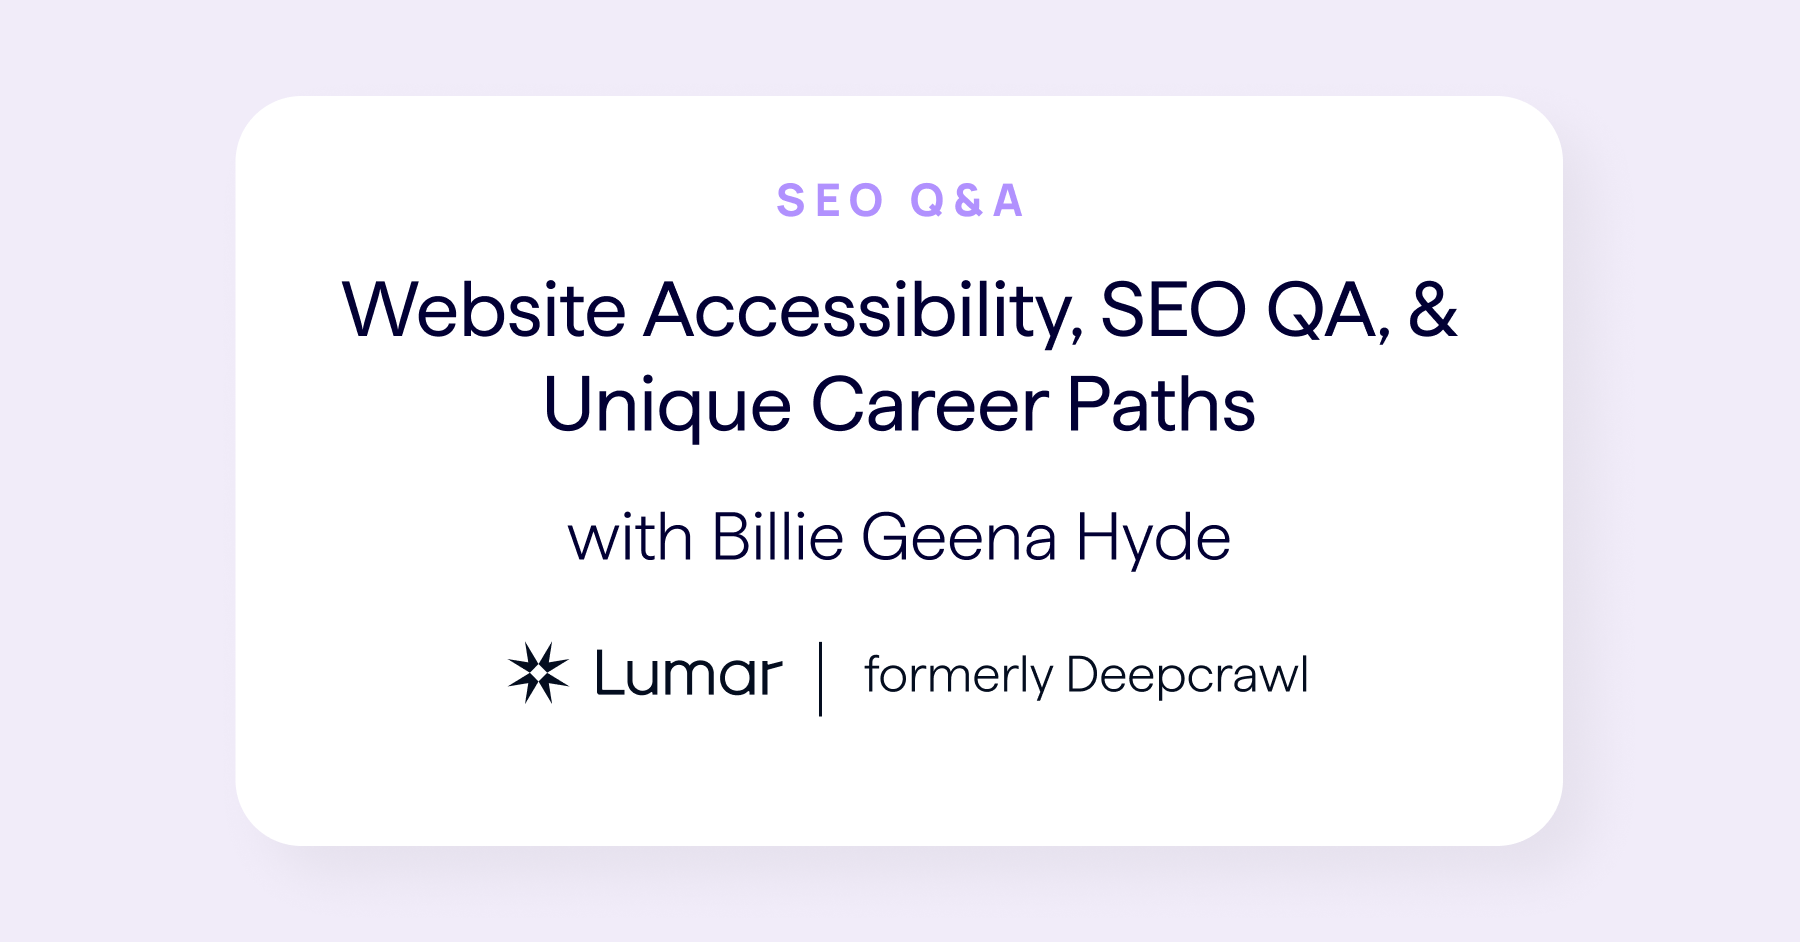 SEO interview about website accessibility and SEO quality assurance testing